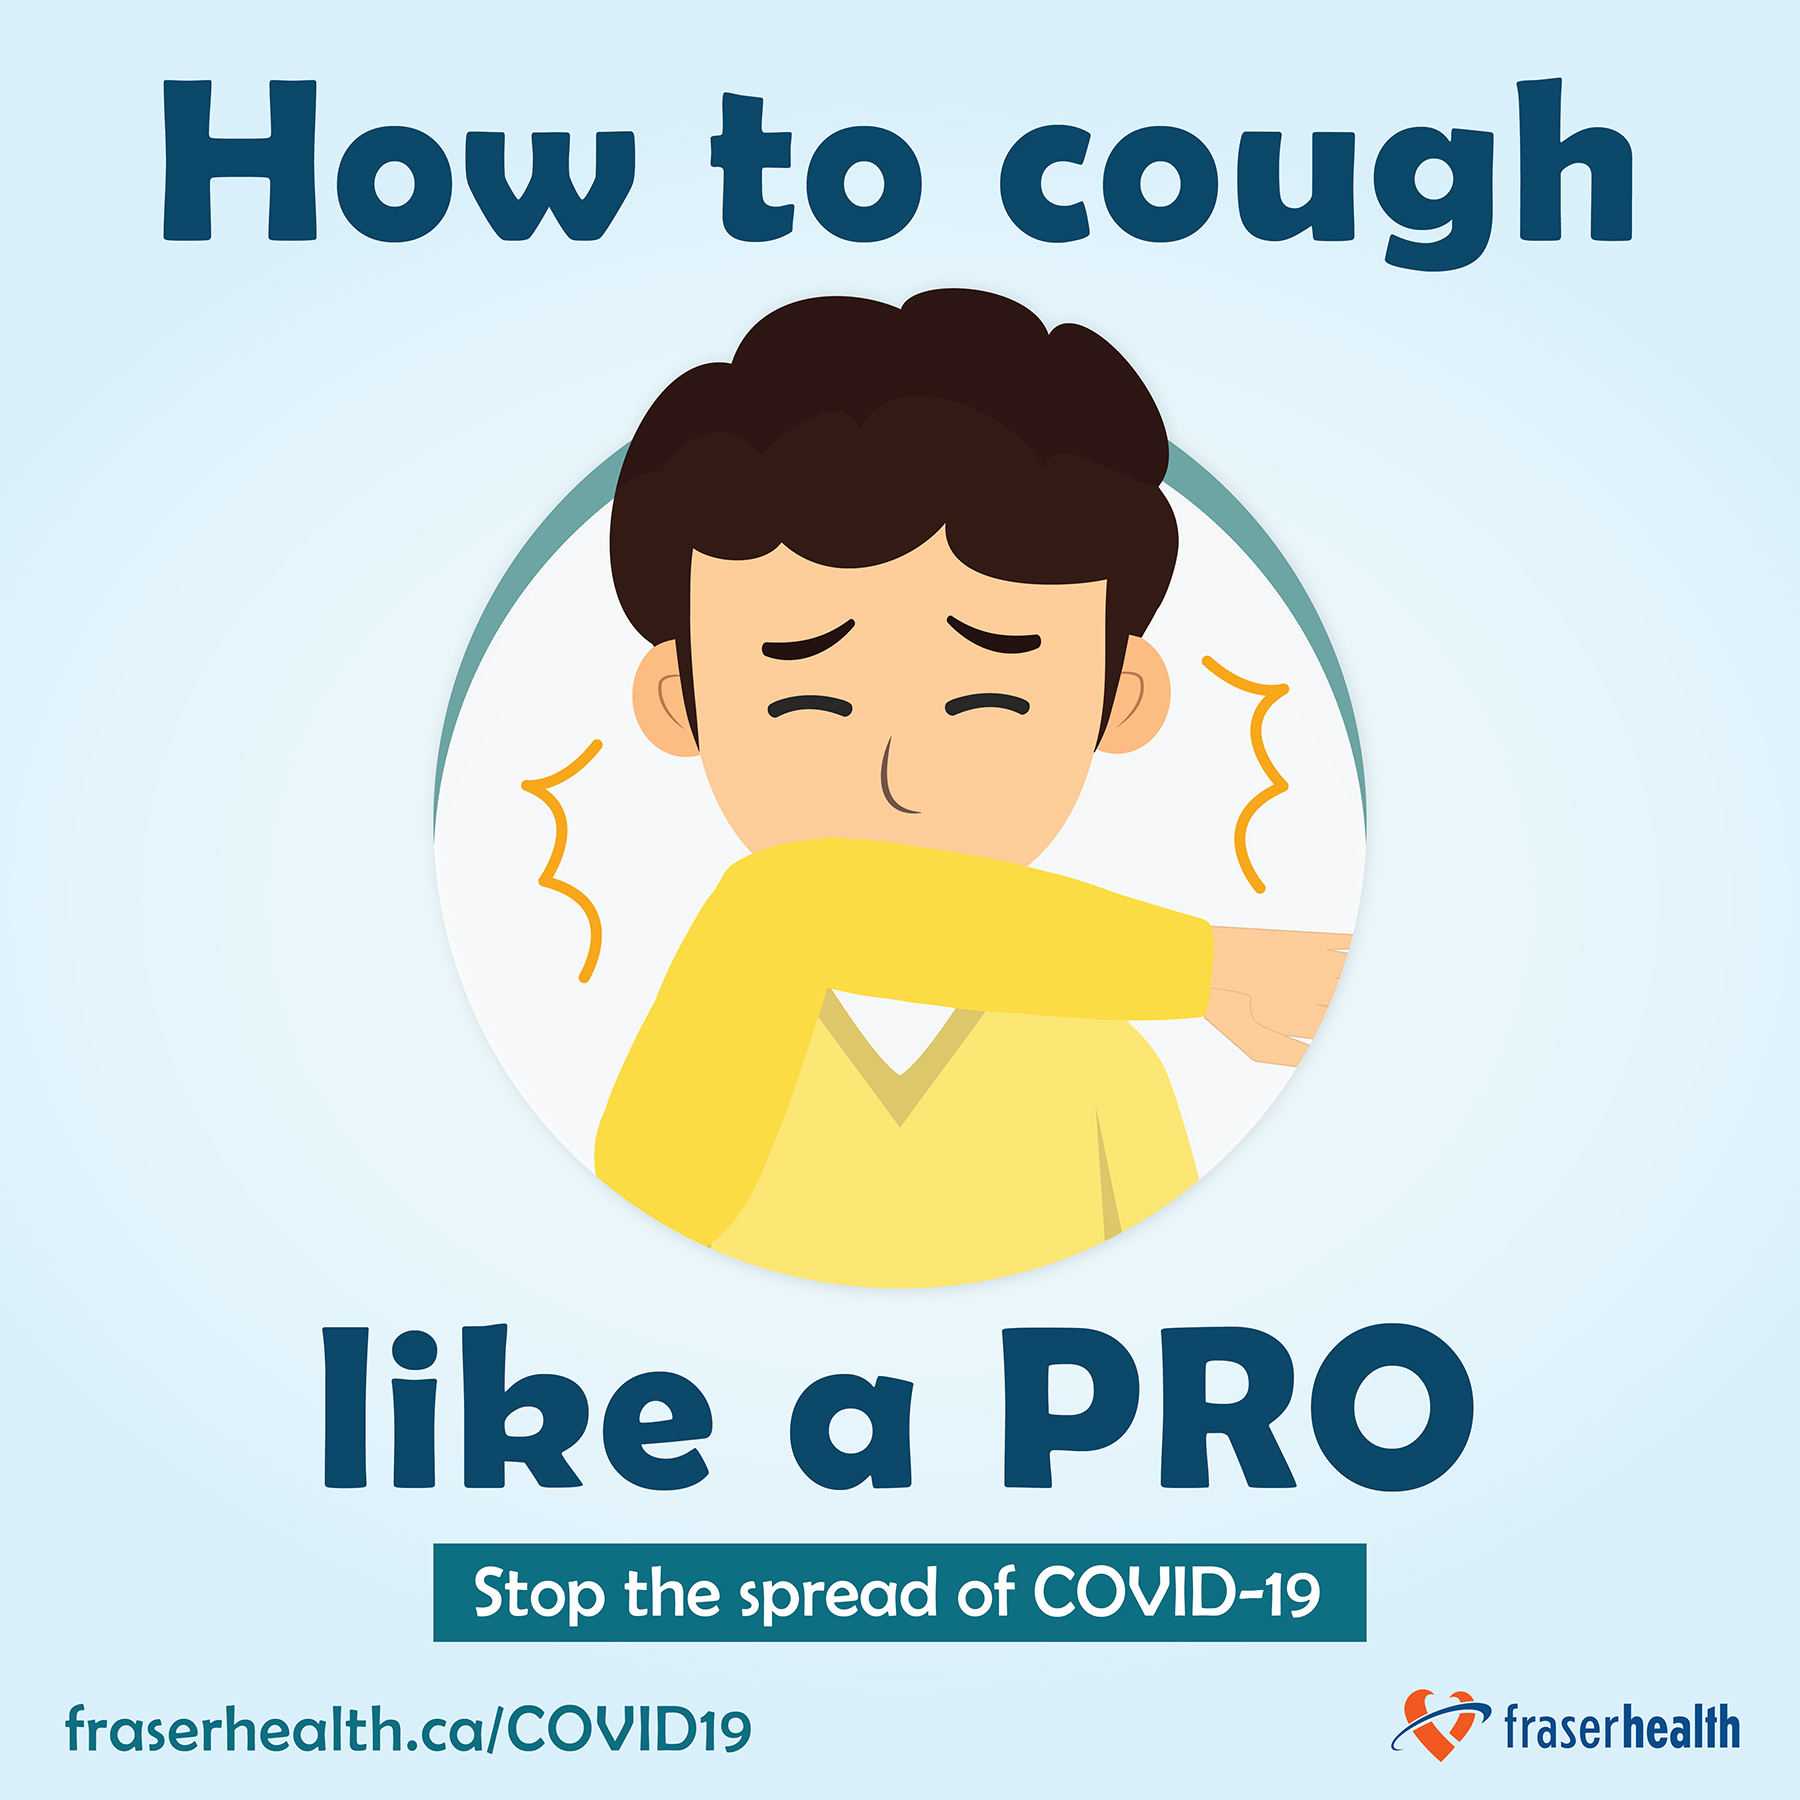 How to cough like a pro graphic with male character for COVID-19